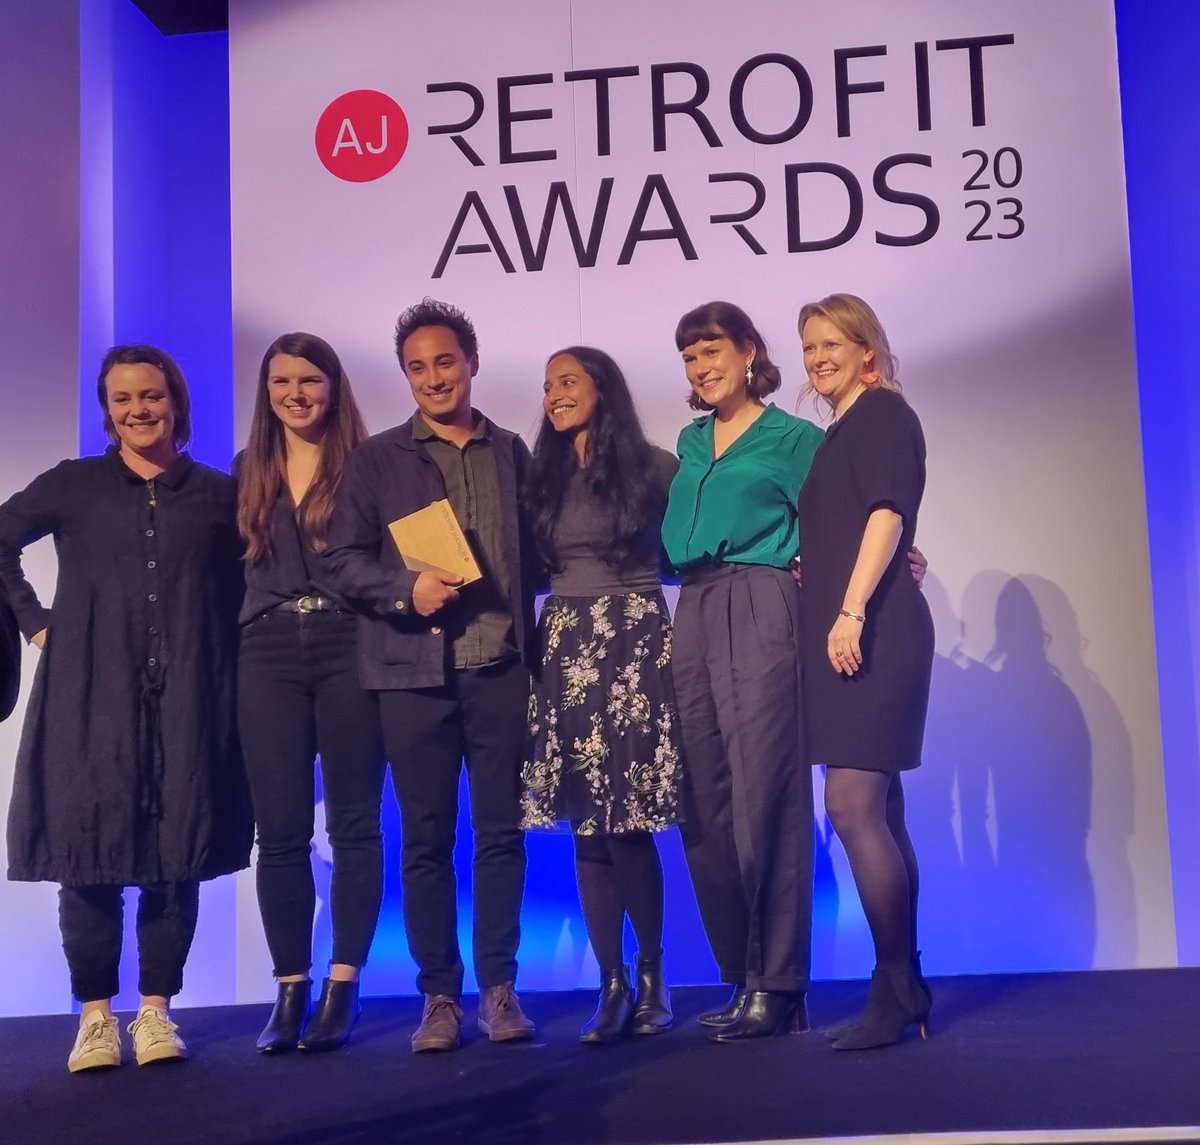 Great night at the #AJRetrofitAwards celebrating the best of #Retrofit and catching up with friends and fellow judges. Congratulations to @MikhailRiches for winning Retrofit of the Year For Park Hill Phase 2. Well deserved.